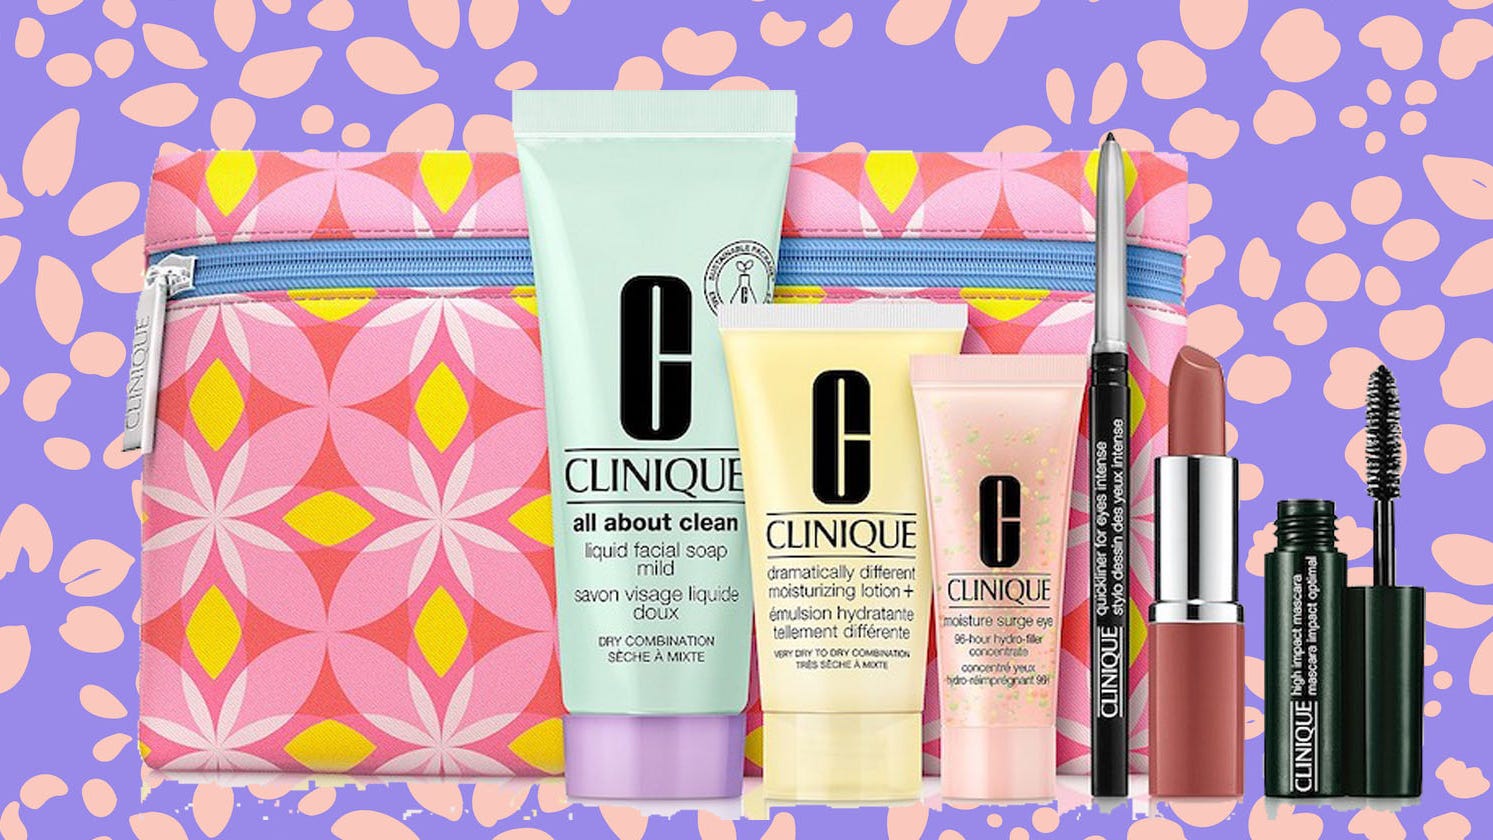 Clinique gift with purchase Spend 31 to get a free 7piece beauty bag